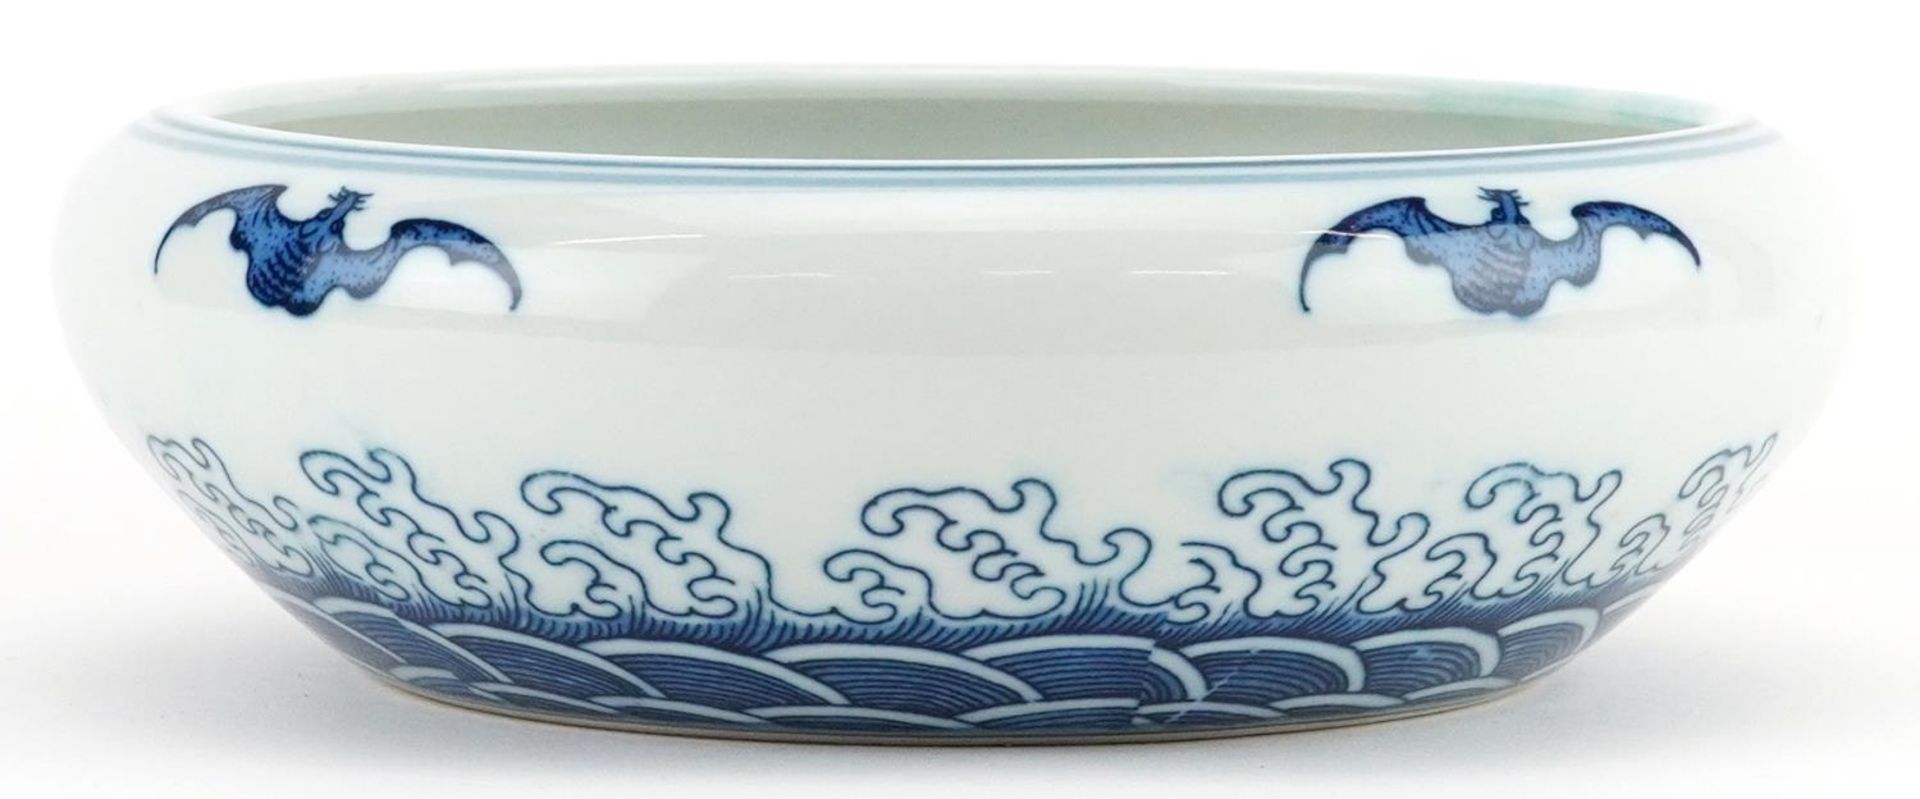 Chinese blue and white porcelain bowl decorated with bats above crashing waves, six figure character - Image 3 of 7